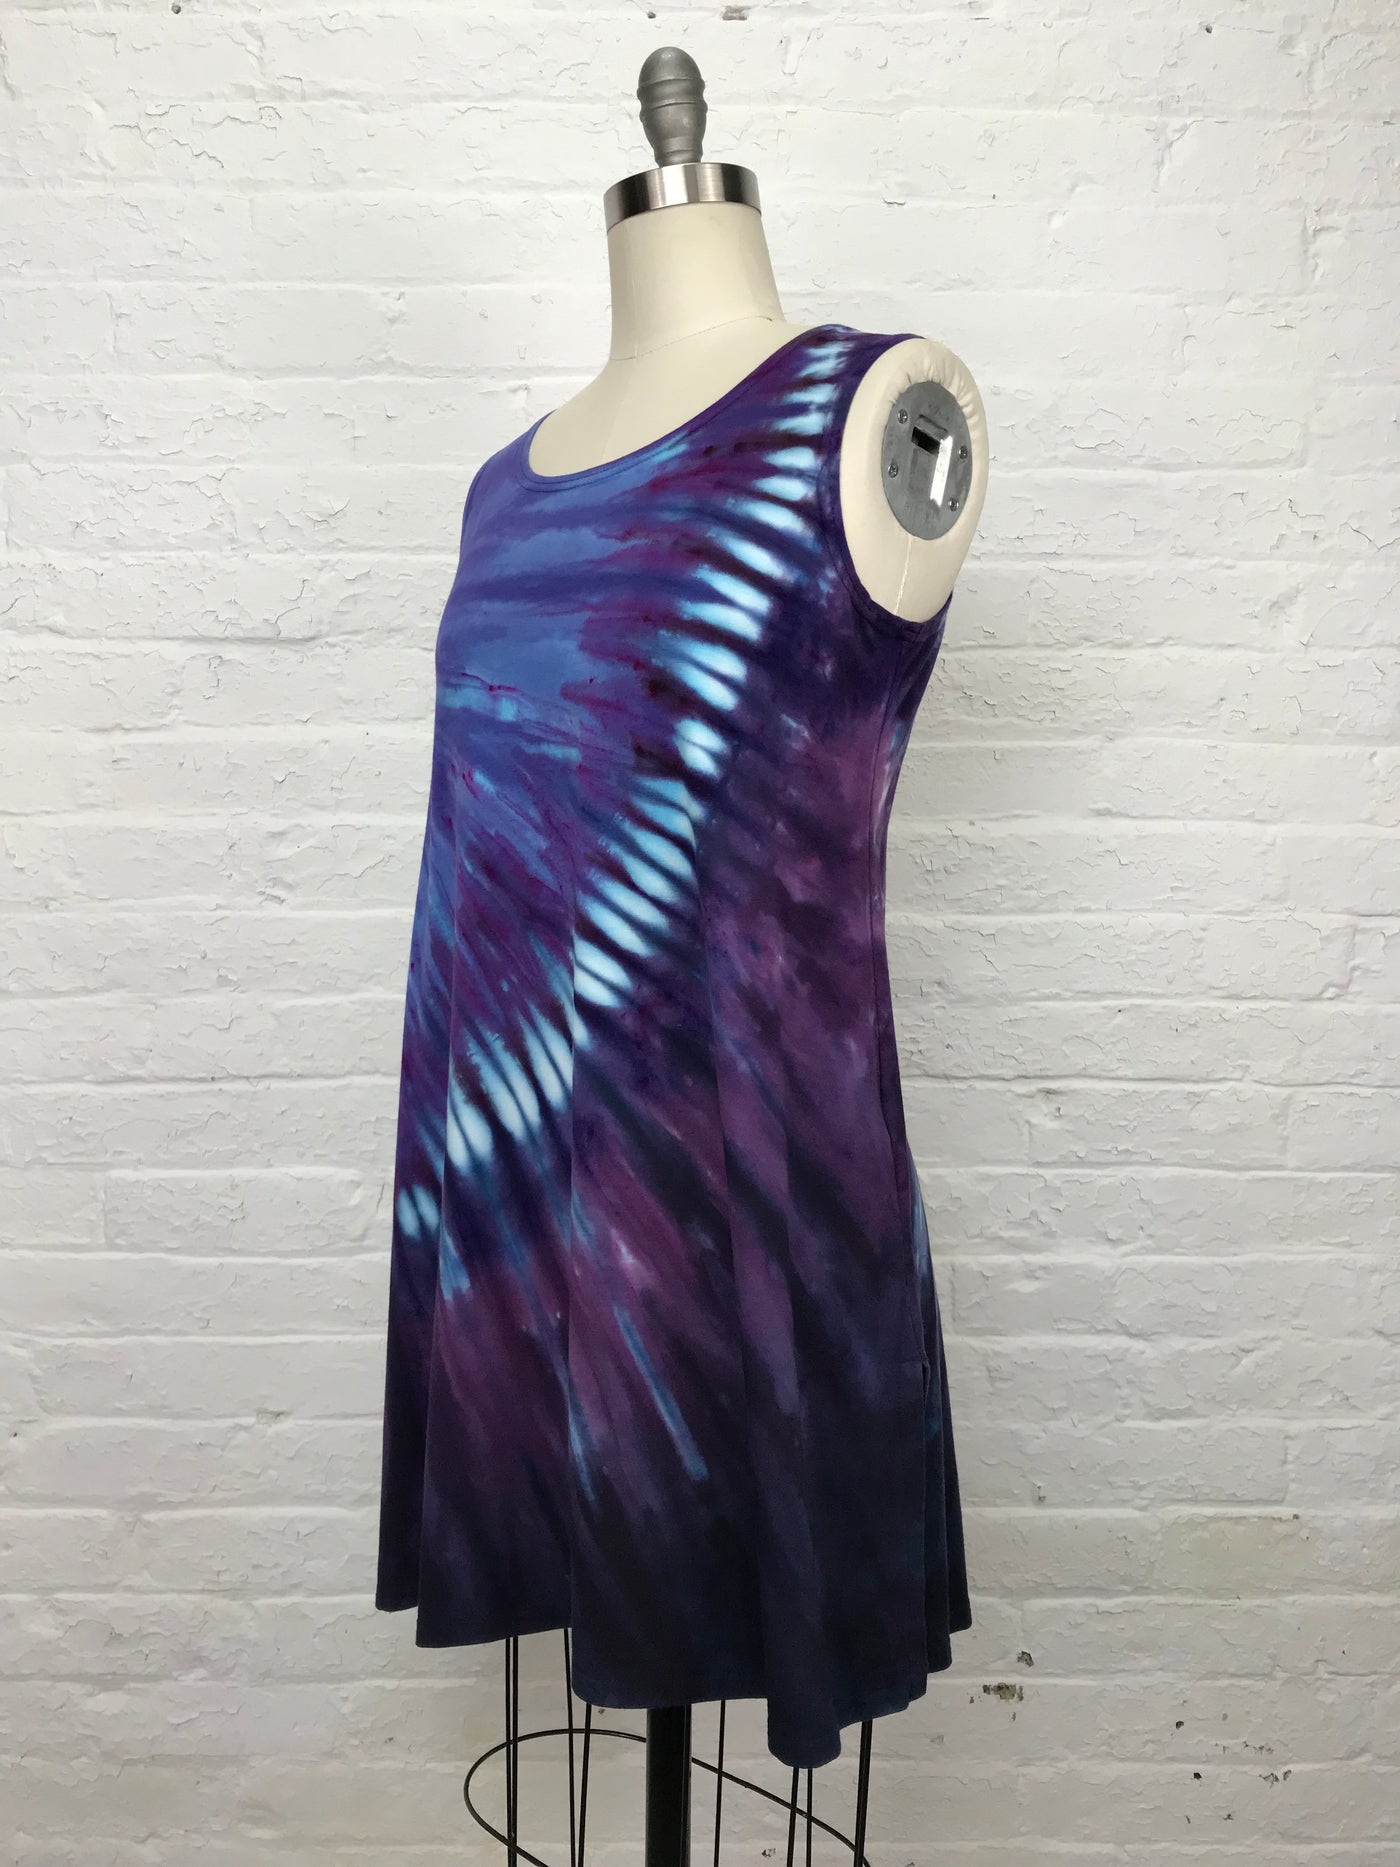 Eileen Mini Tank Tunic in Violet Arch - side view